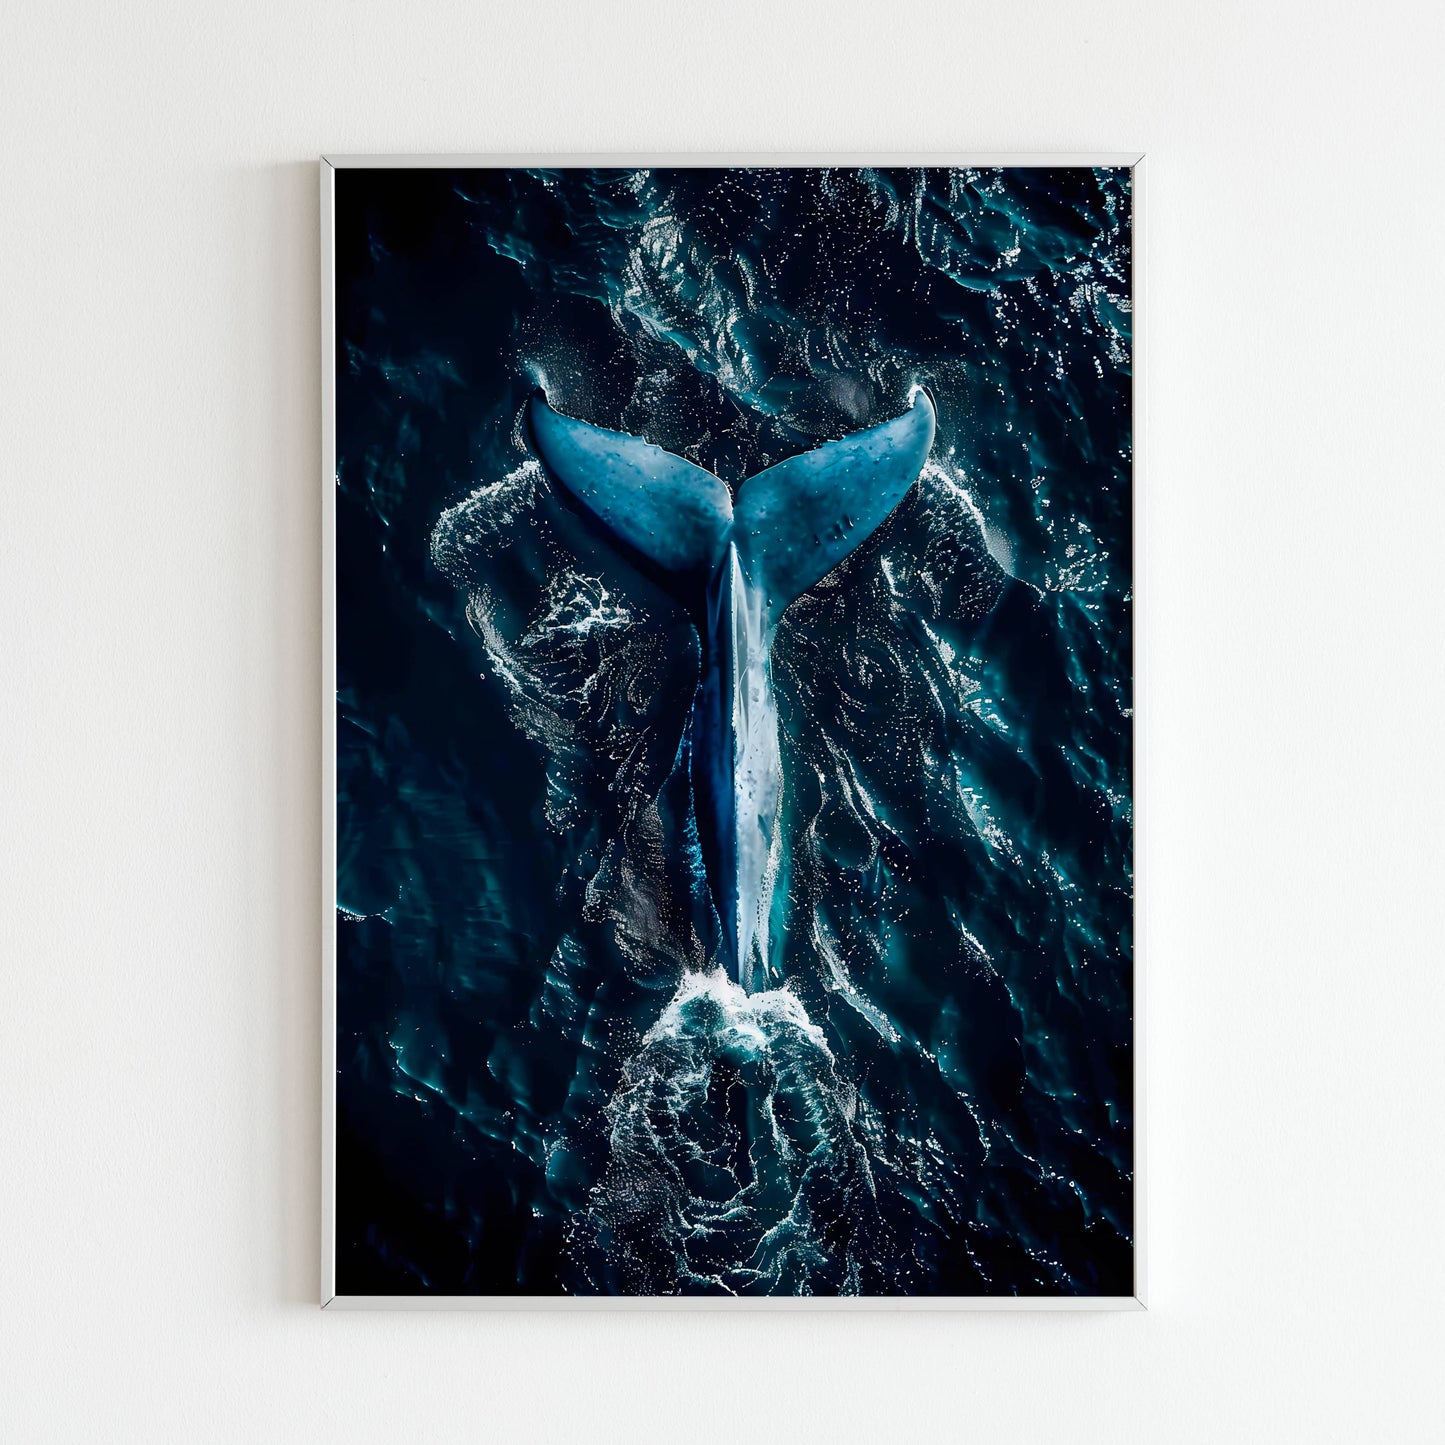 Downloadable abstract art print featuring a blue whale